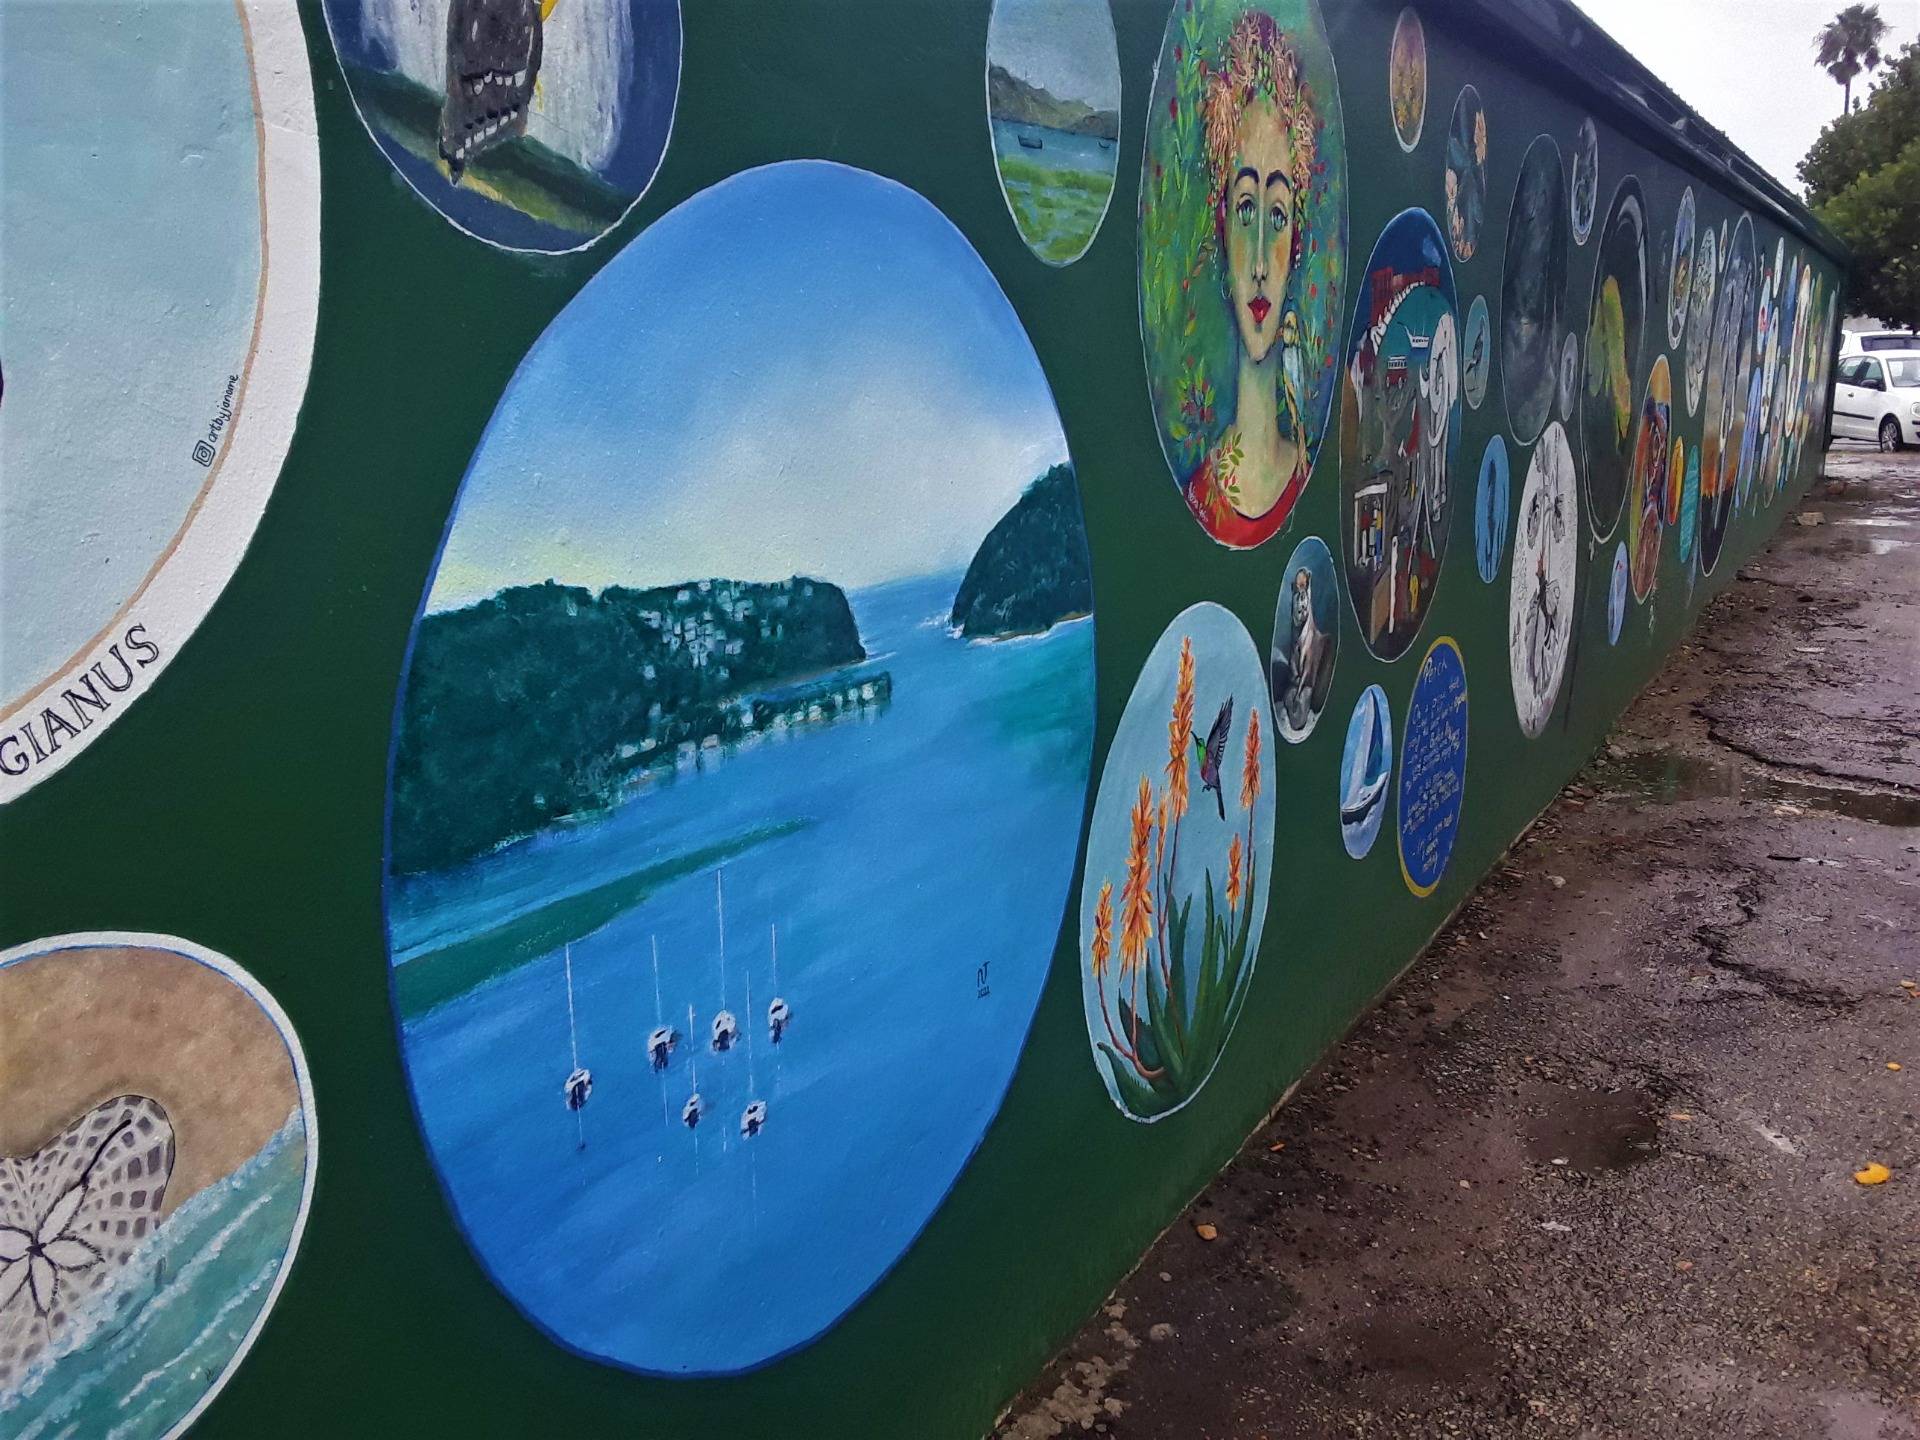 Reflections on the artistic tourist town of Knysna – south coast of Africa